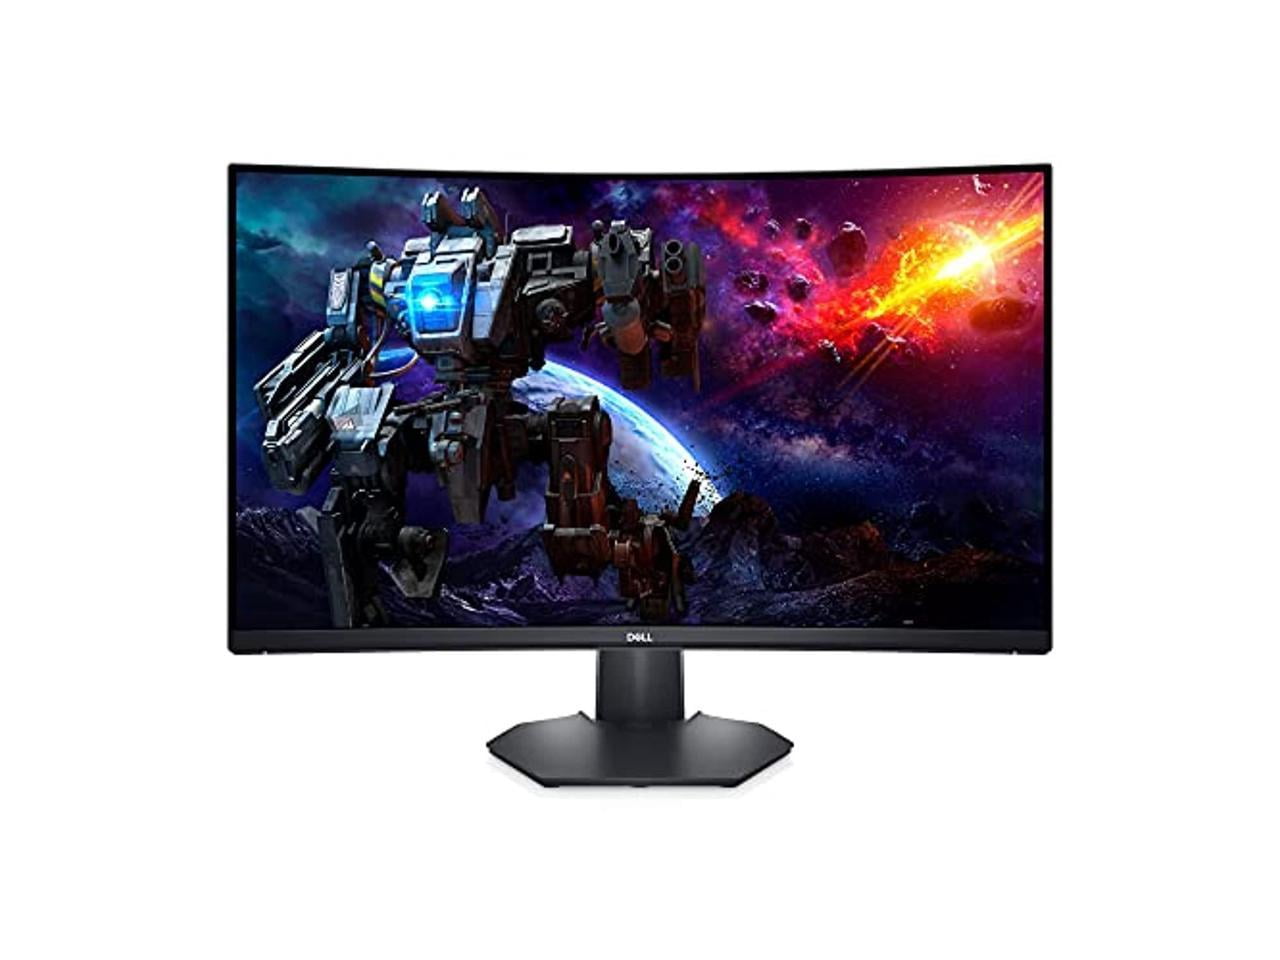 Dell S3222HG 32-inch FHD 1920 x 1080 at 165Hz Curved Gaming Monitor, 1800R  Curvature, 4ms Grey-to-Grey Response Time (Super Fast Mode), 16.7 Million  Colors, Black (Latest Model)